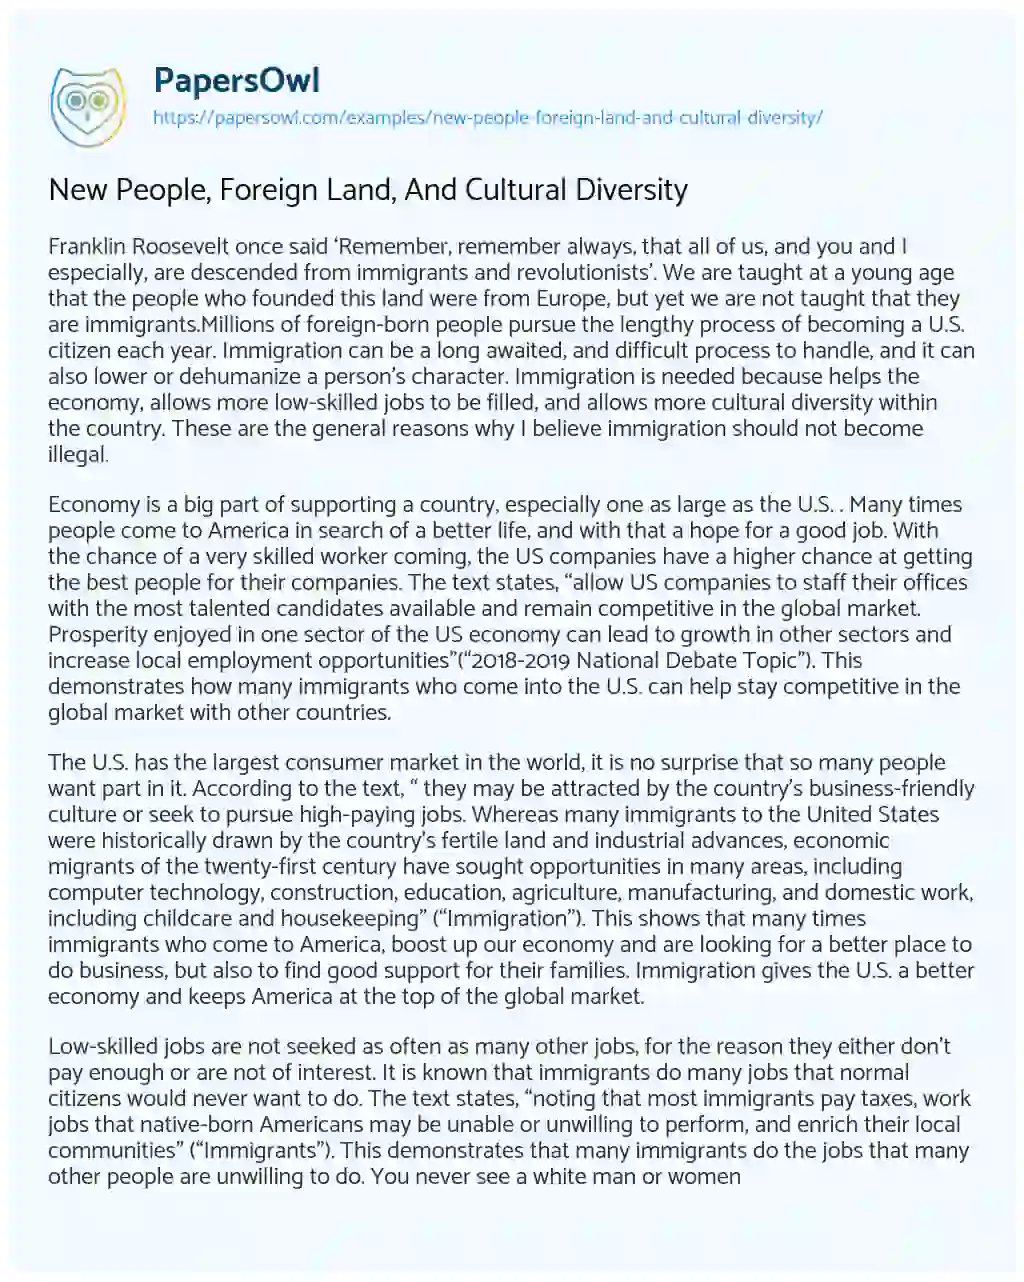 Essay on New People, Foreign Land, and Cultural Diversity